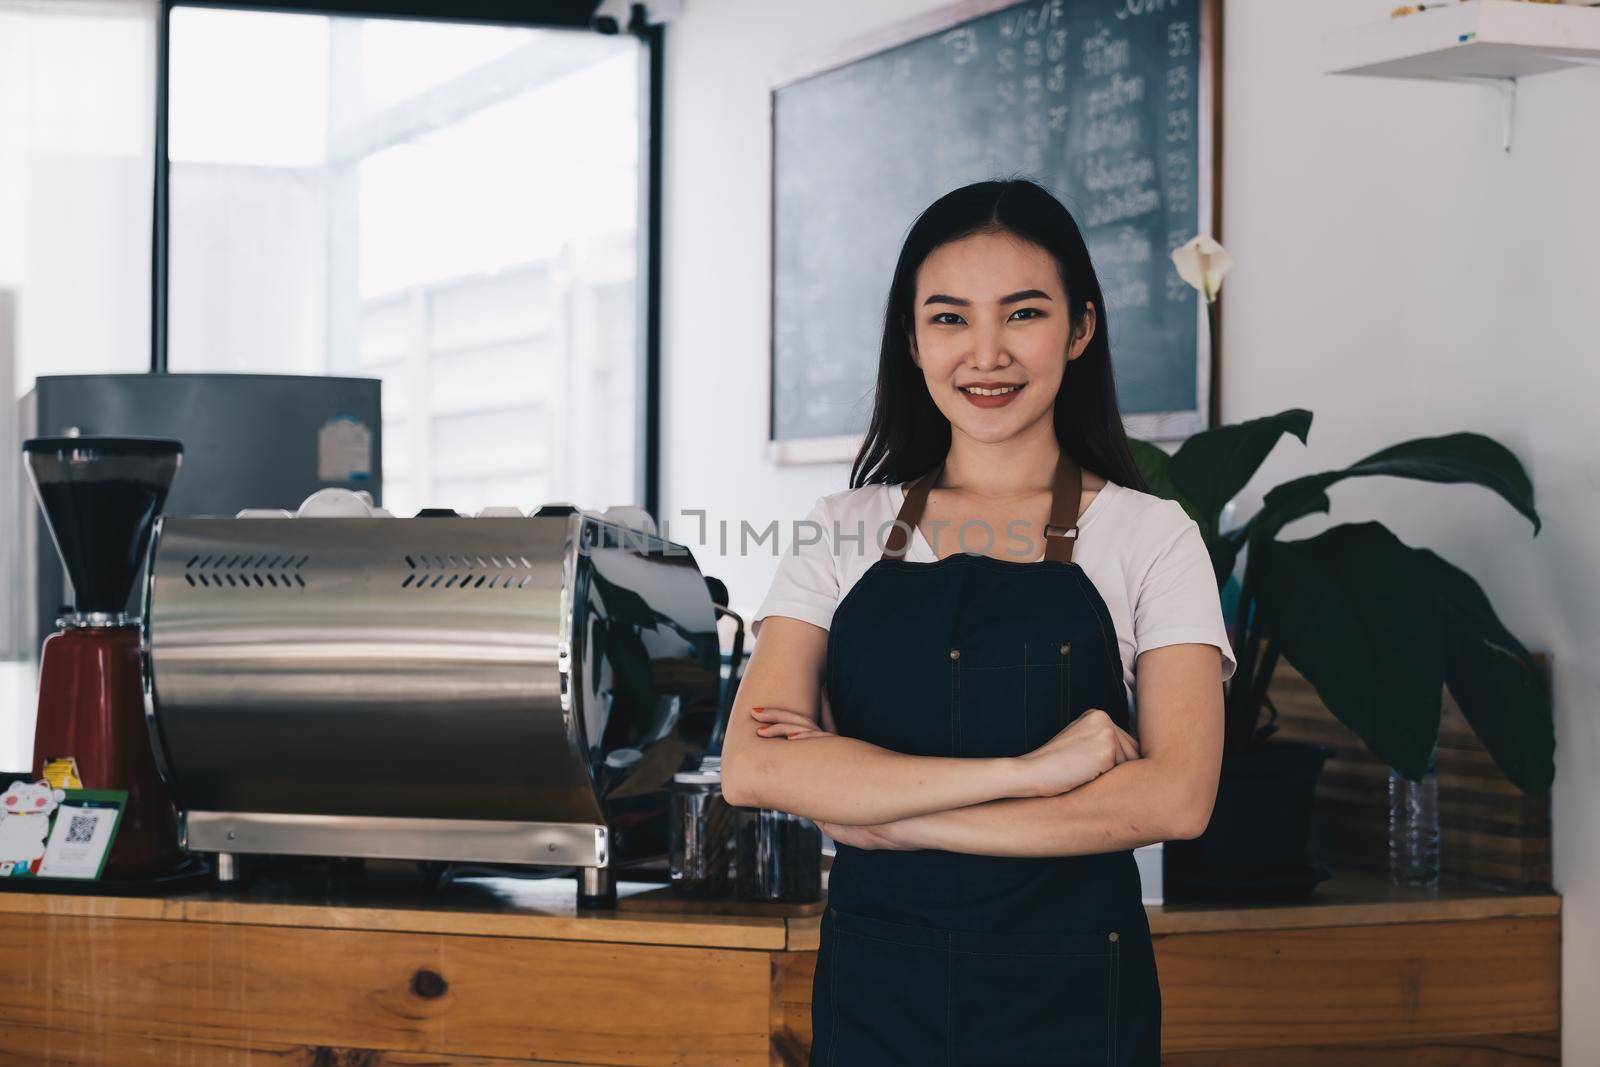 At her cafe, the business owner or barista is taking orders from customers